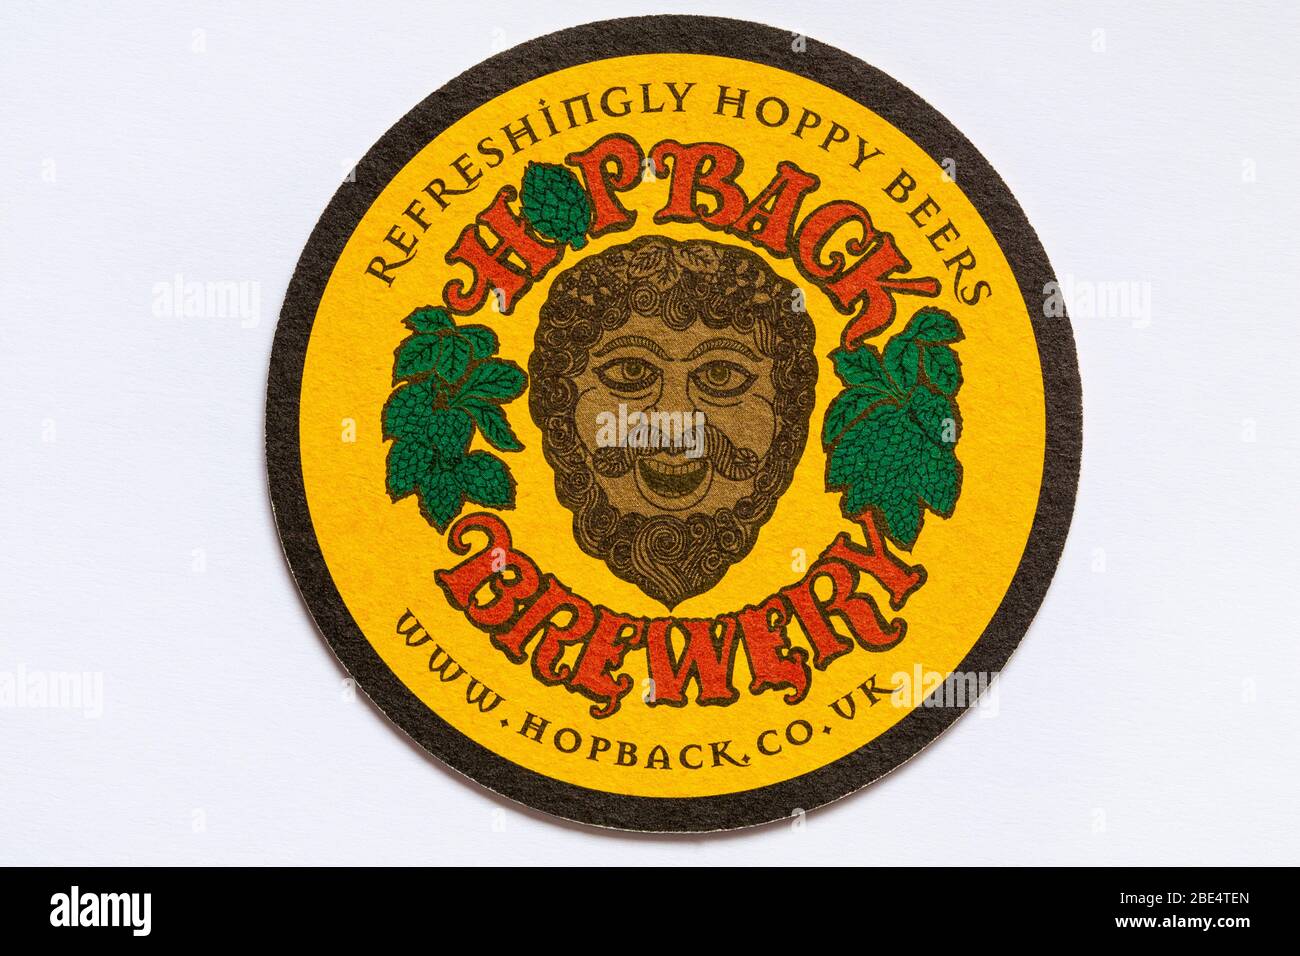 Refreshingly Hoppy Beers Hopback Brewery beer mat coaster isolated on white background - for other side of coaster see  2BE4TJH Stock Photo